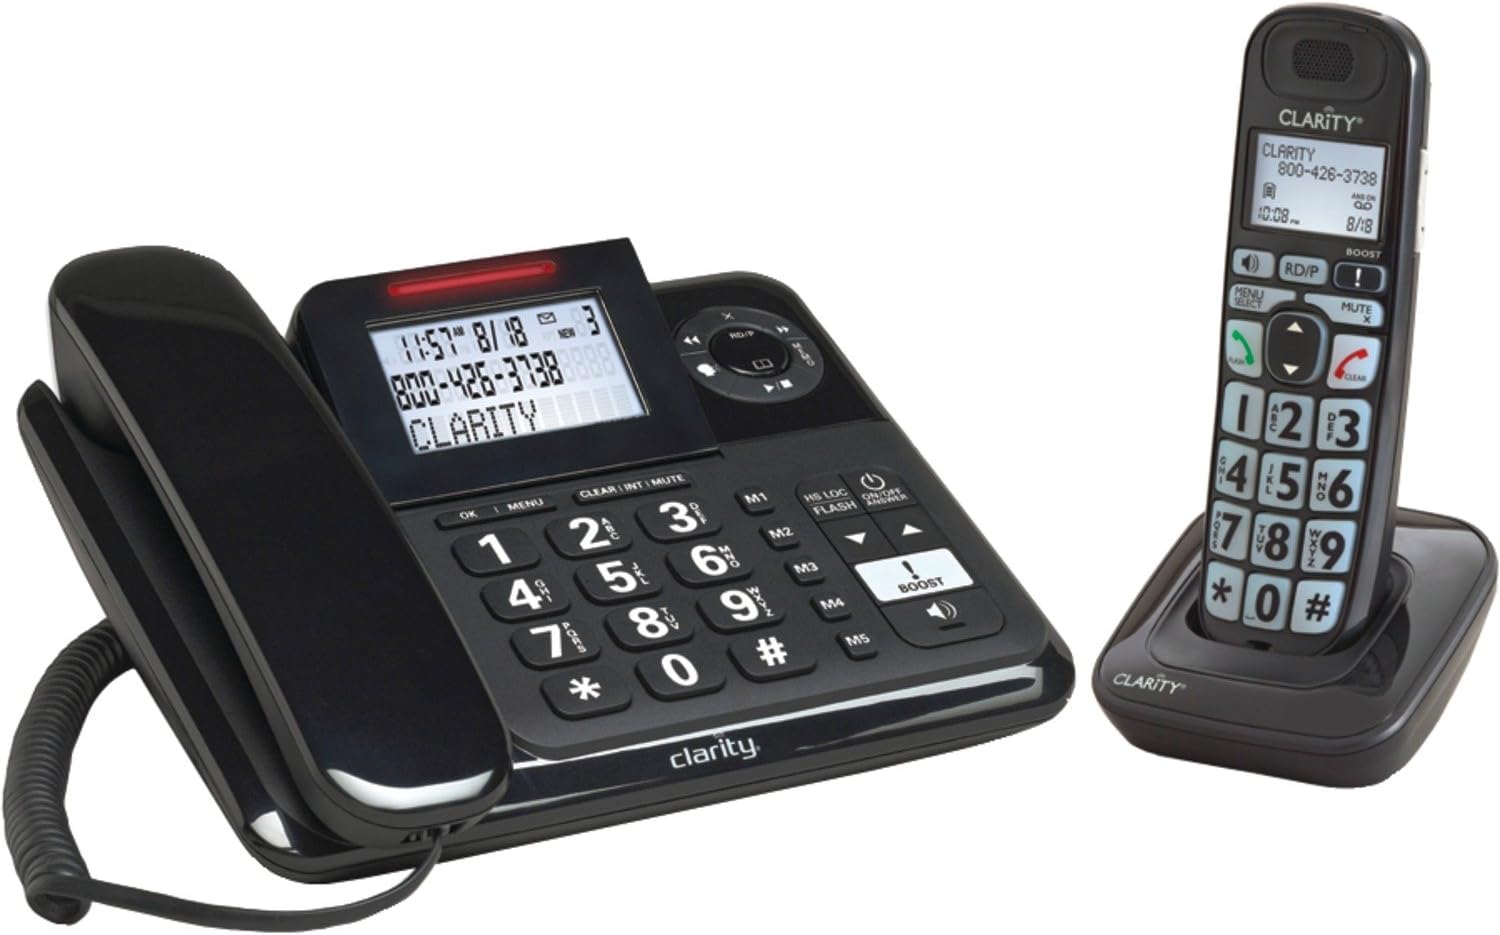 Clarity Amplified Corded/Cordless Combo with Speakerphone and Digital Answering Machine